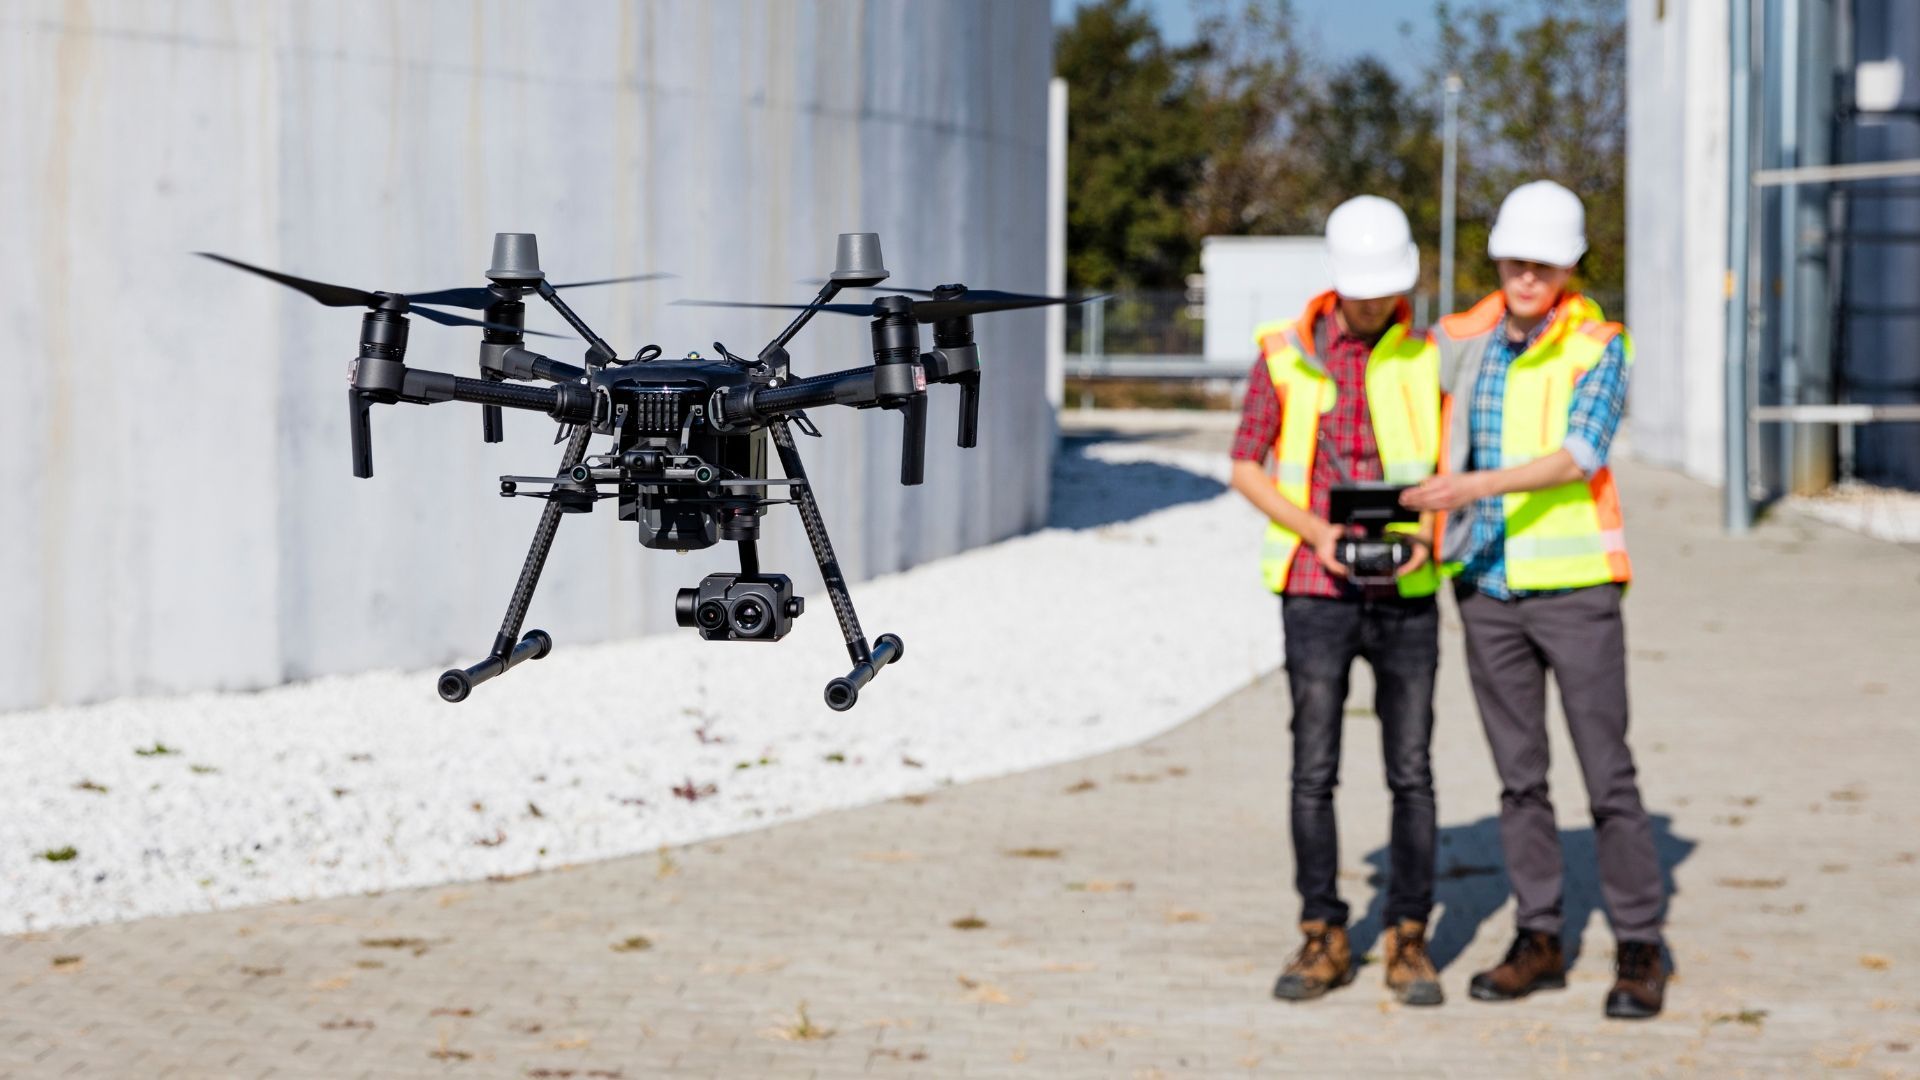 Aerial Drone Photography being controlled by two engineered in the background